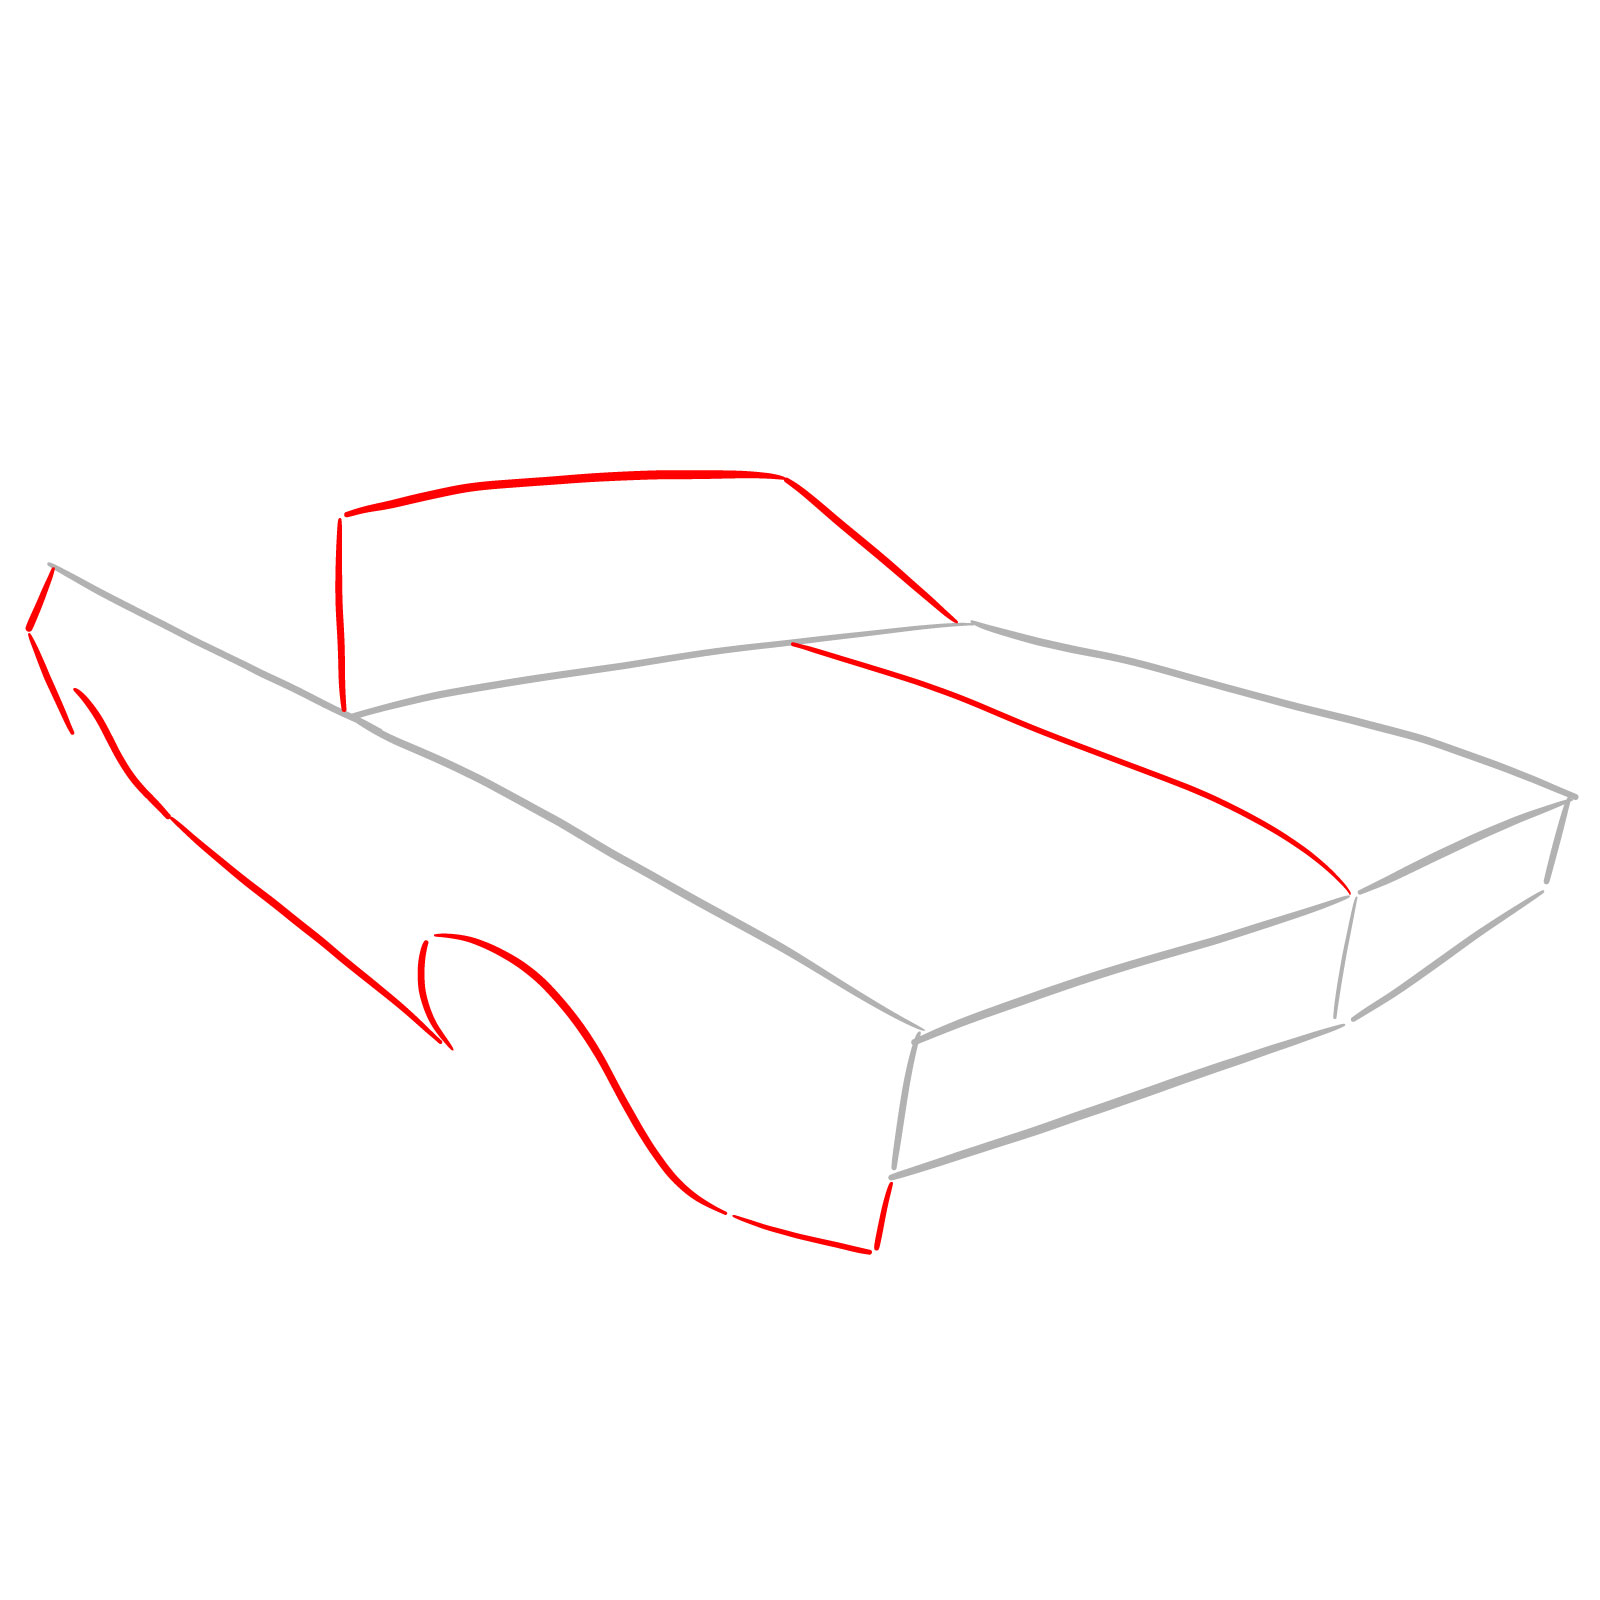 How to draw Dodge Challenger 1970 - step 02